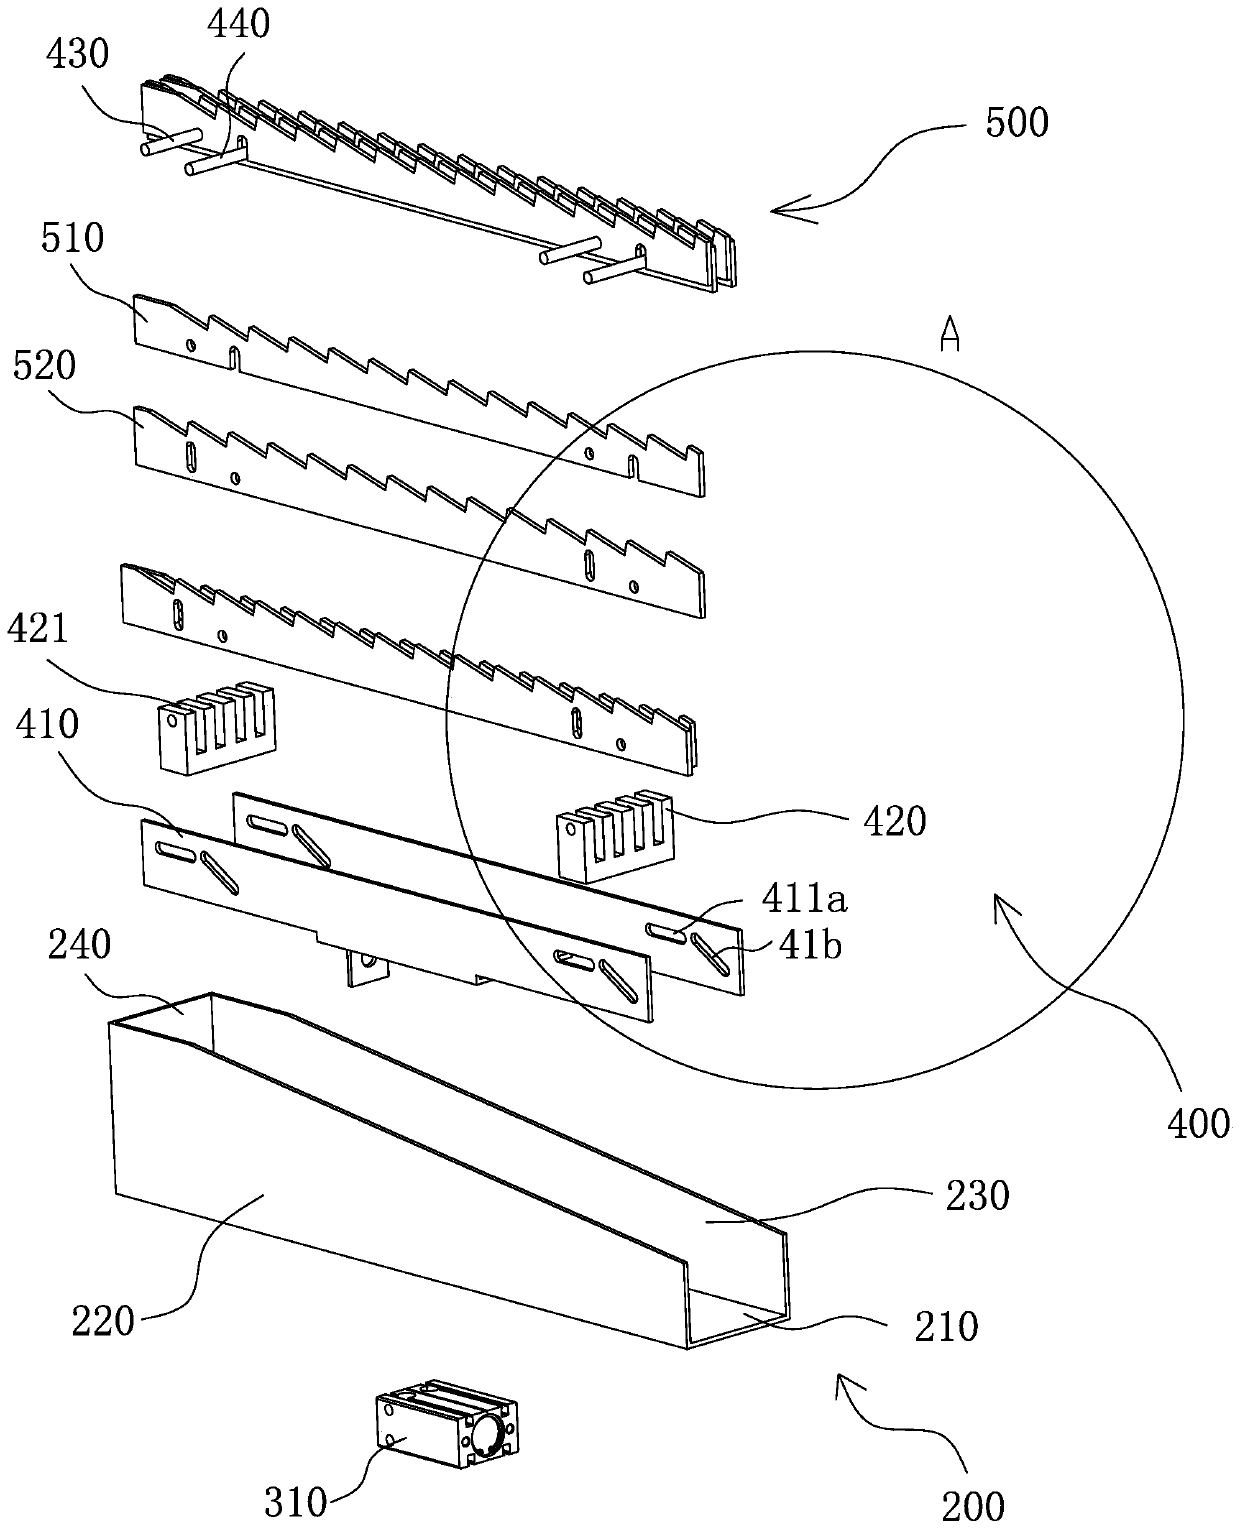 Special-shaped part feeding and shaping mechanism